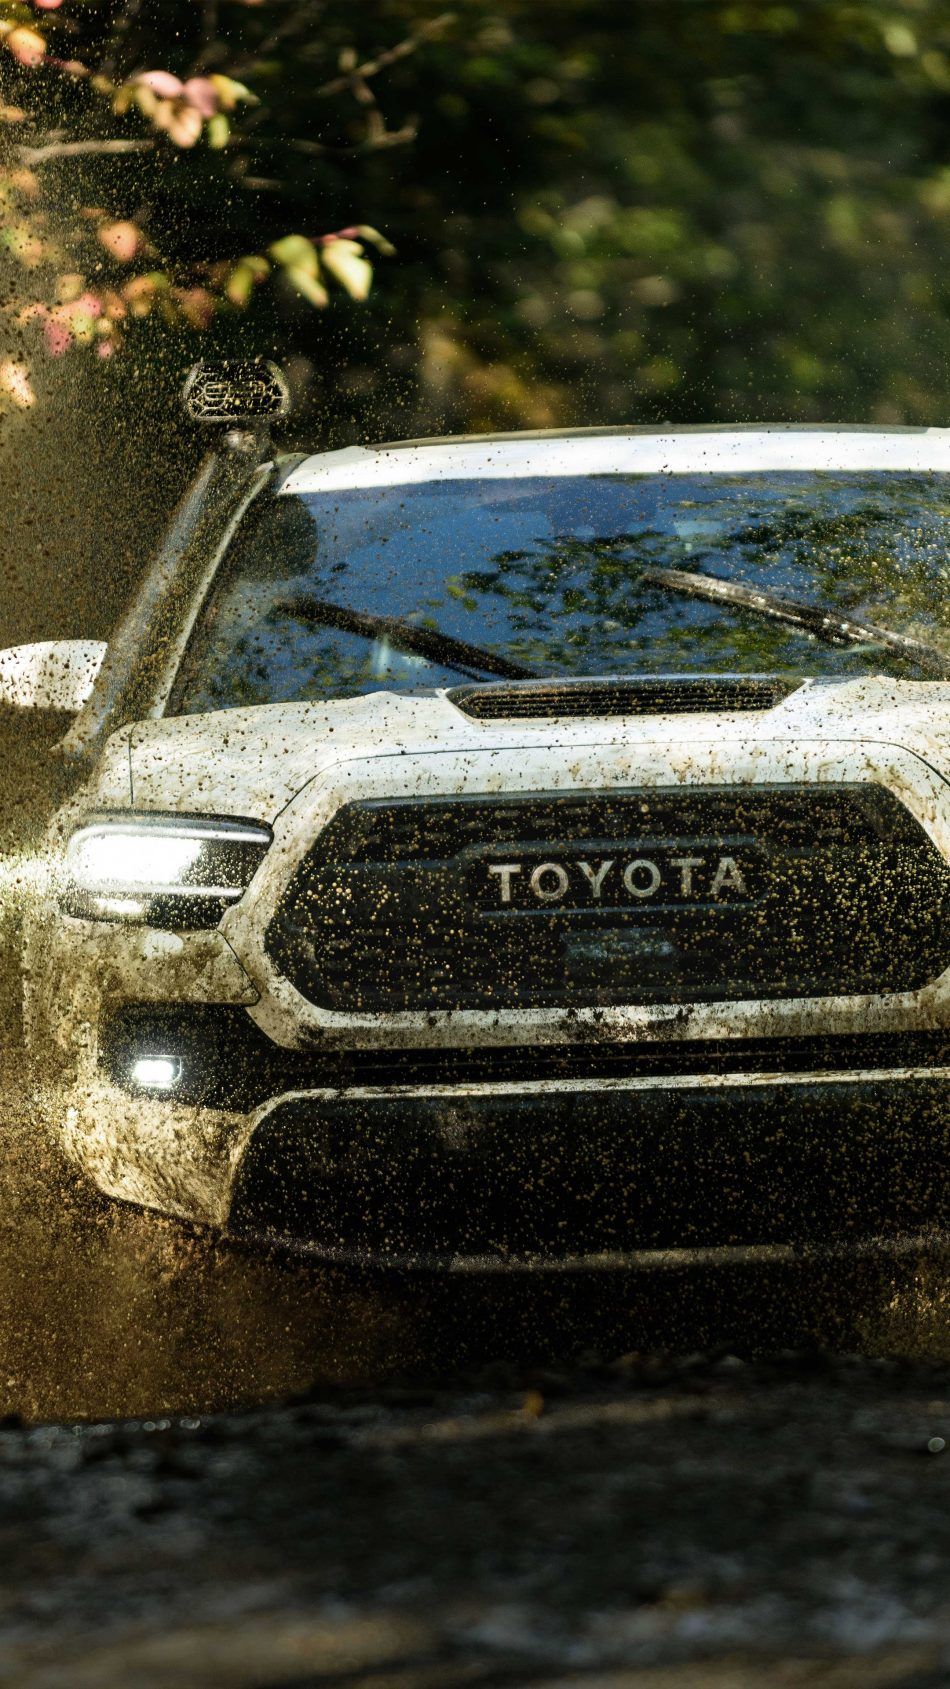 Toyota Taa Trd Pro Double Cab 4k Ultra HD Mobile Wallpaper